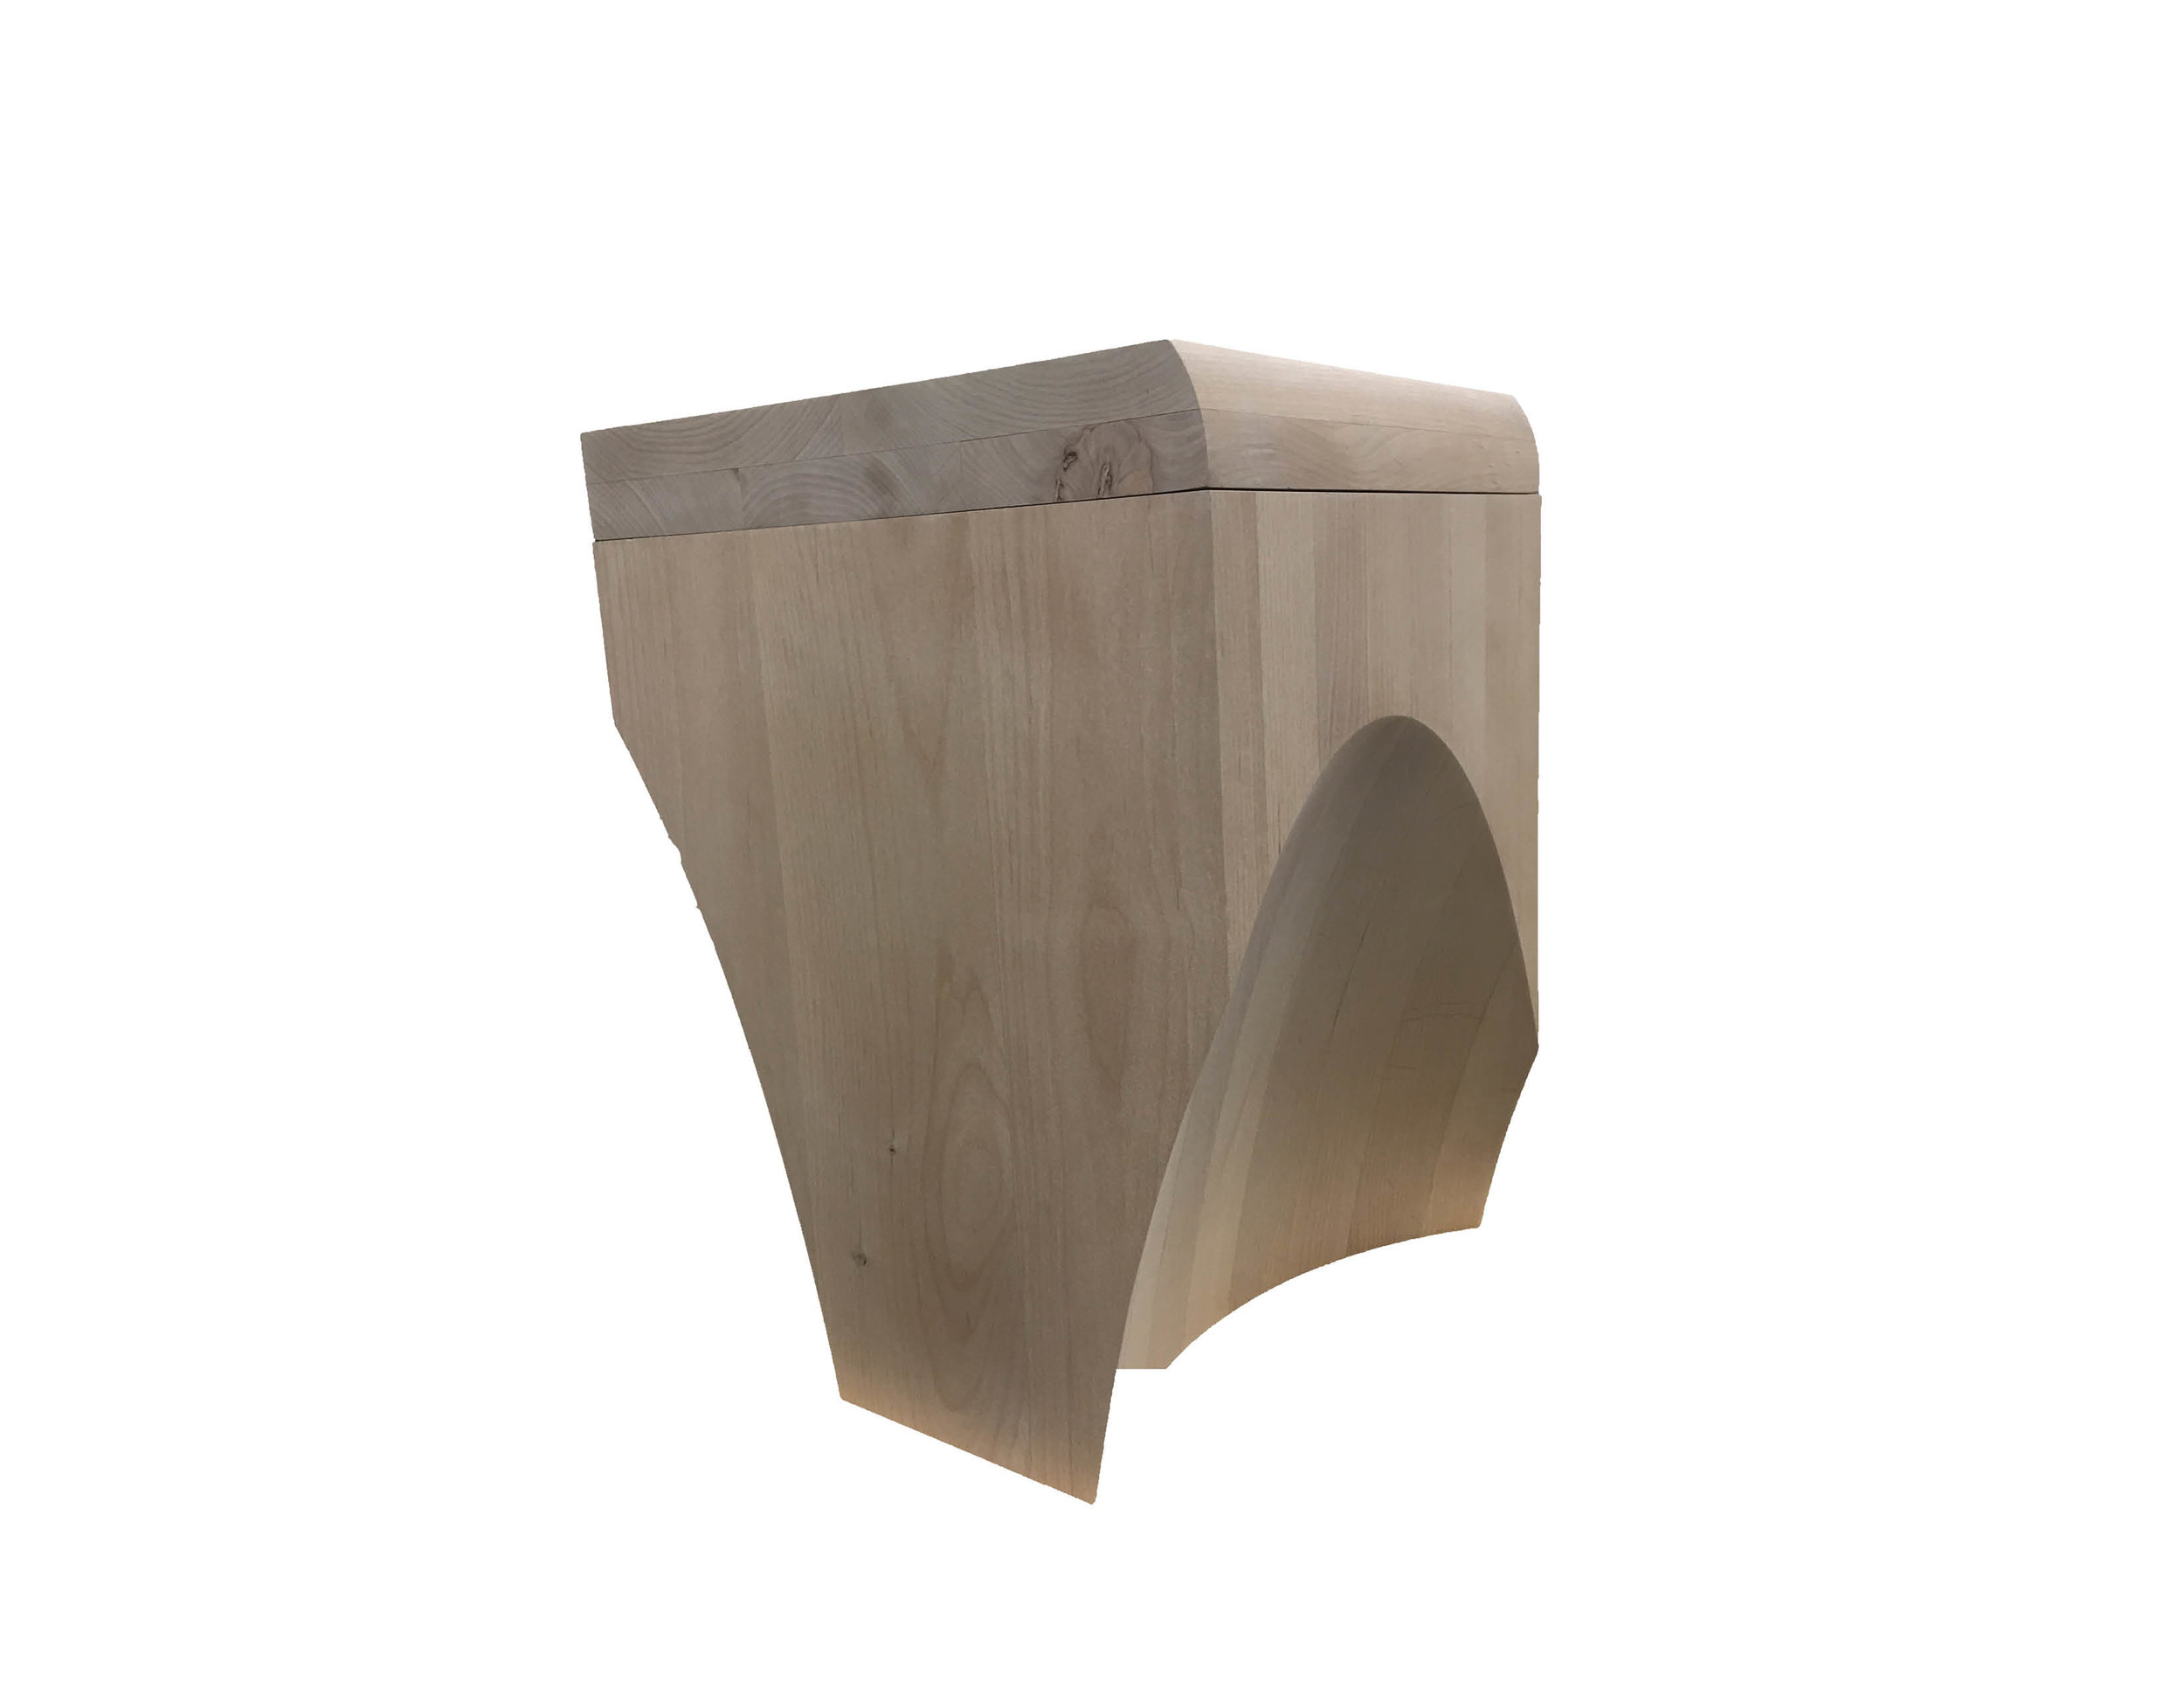 Second View of Full-Sized Final Prototype of Stool Concept 1